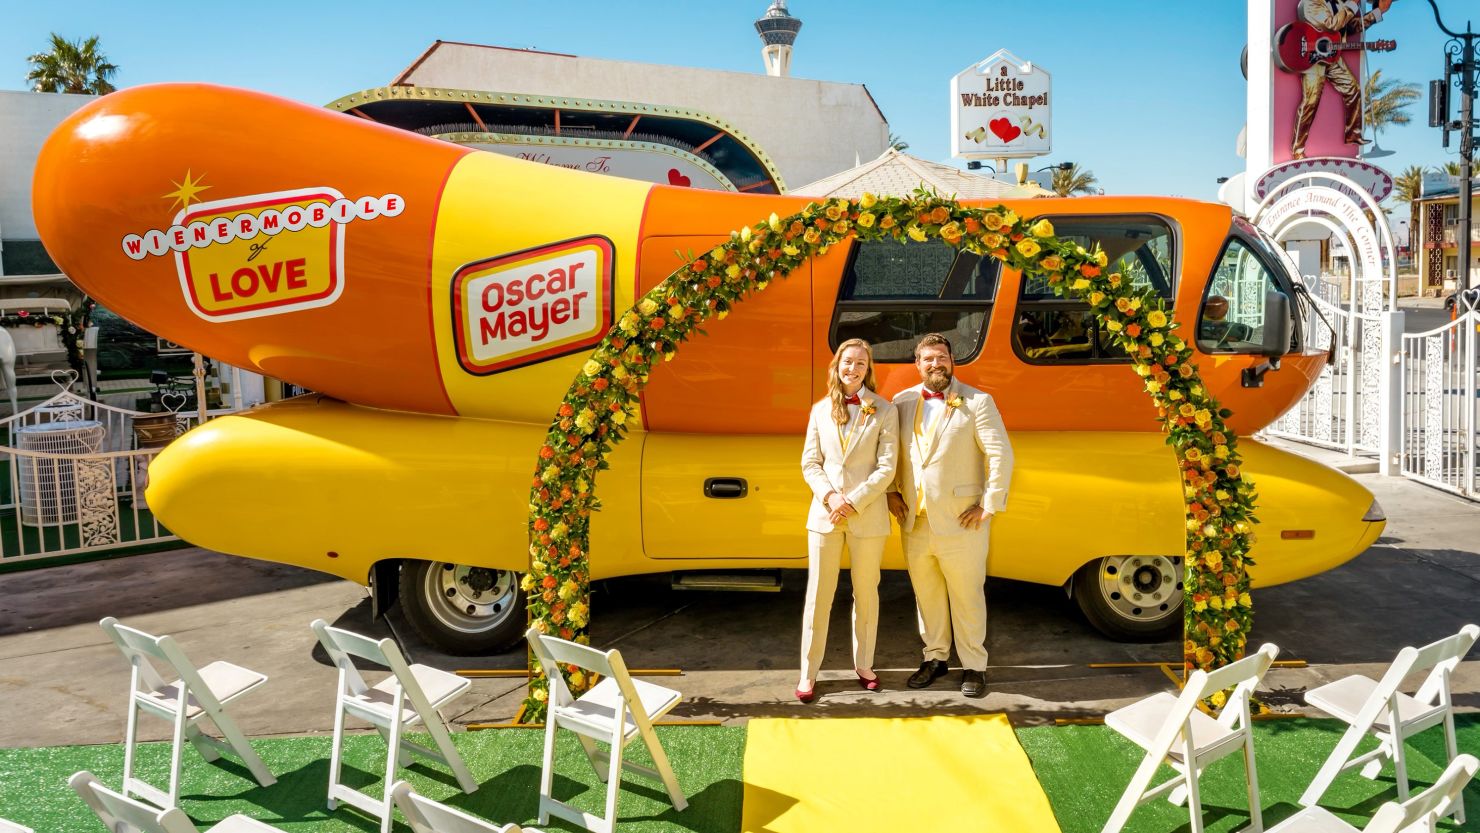 Weddings at the Oscar Mayer "Wienermobile of Love" in Las Vegas will be free of charge.